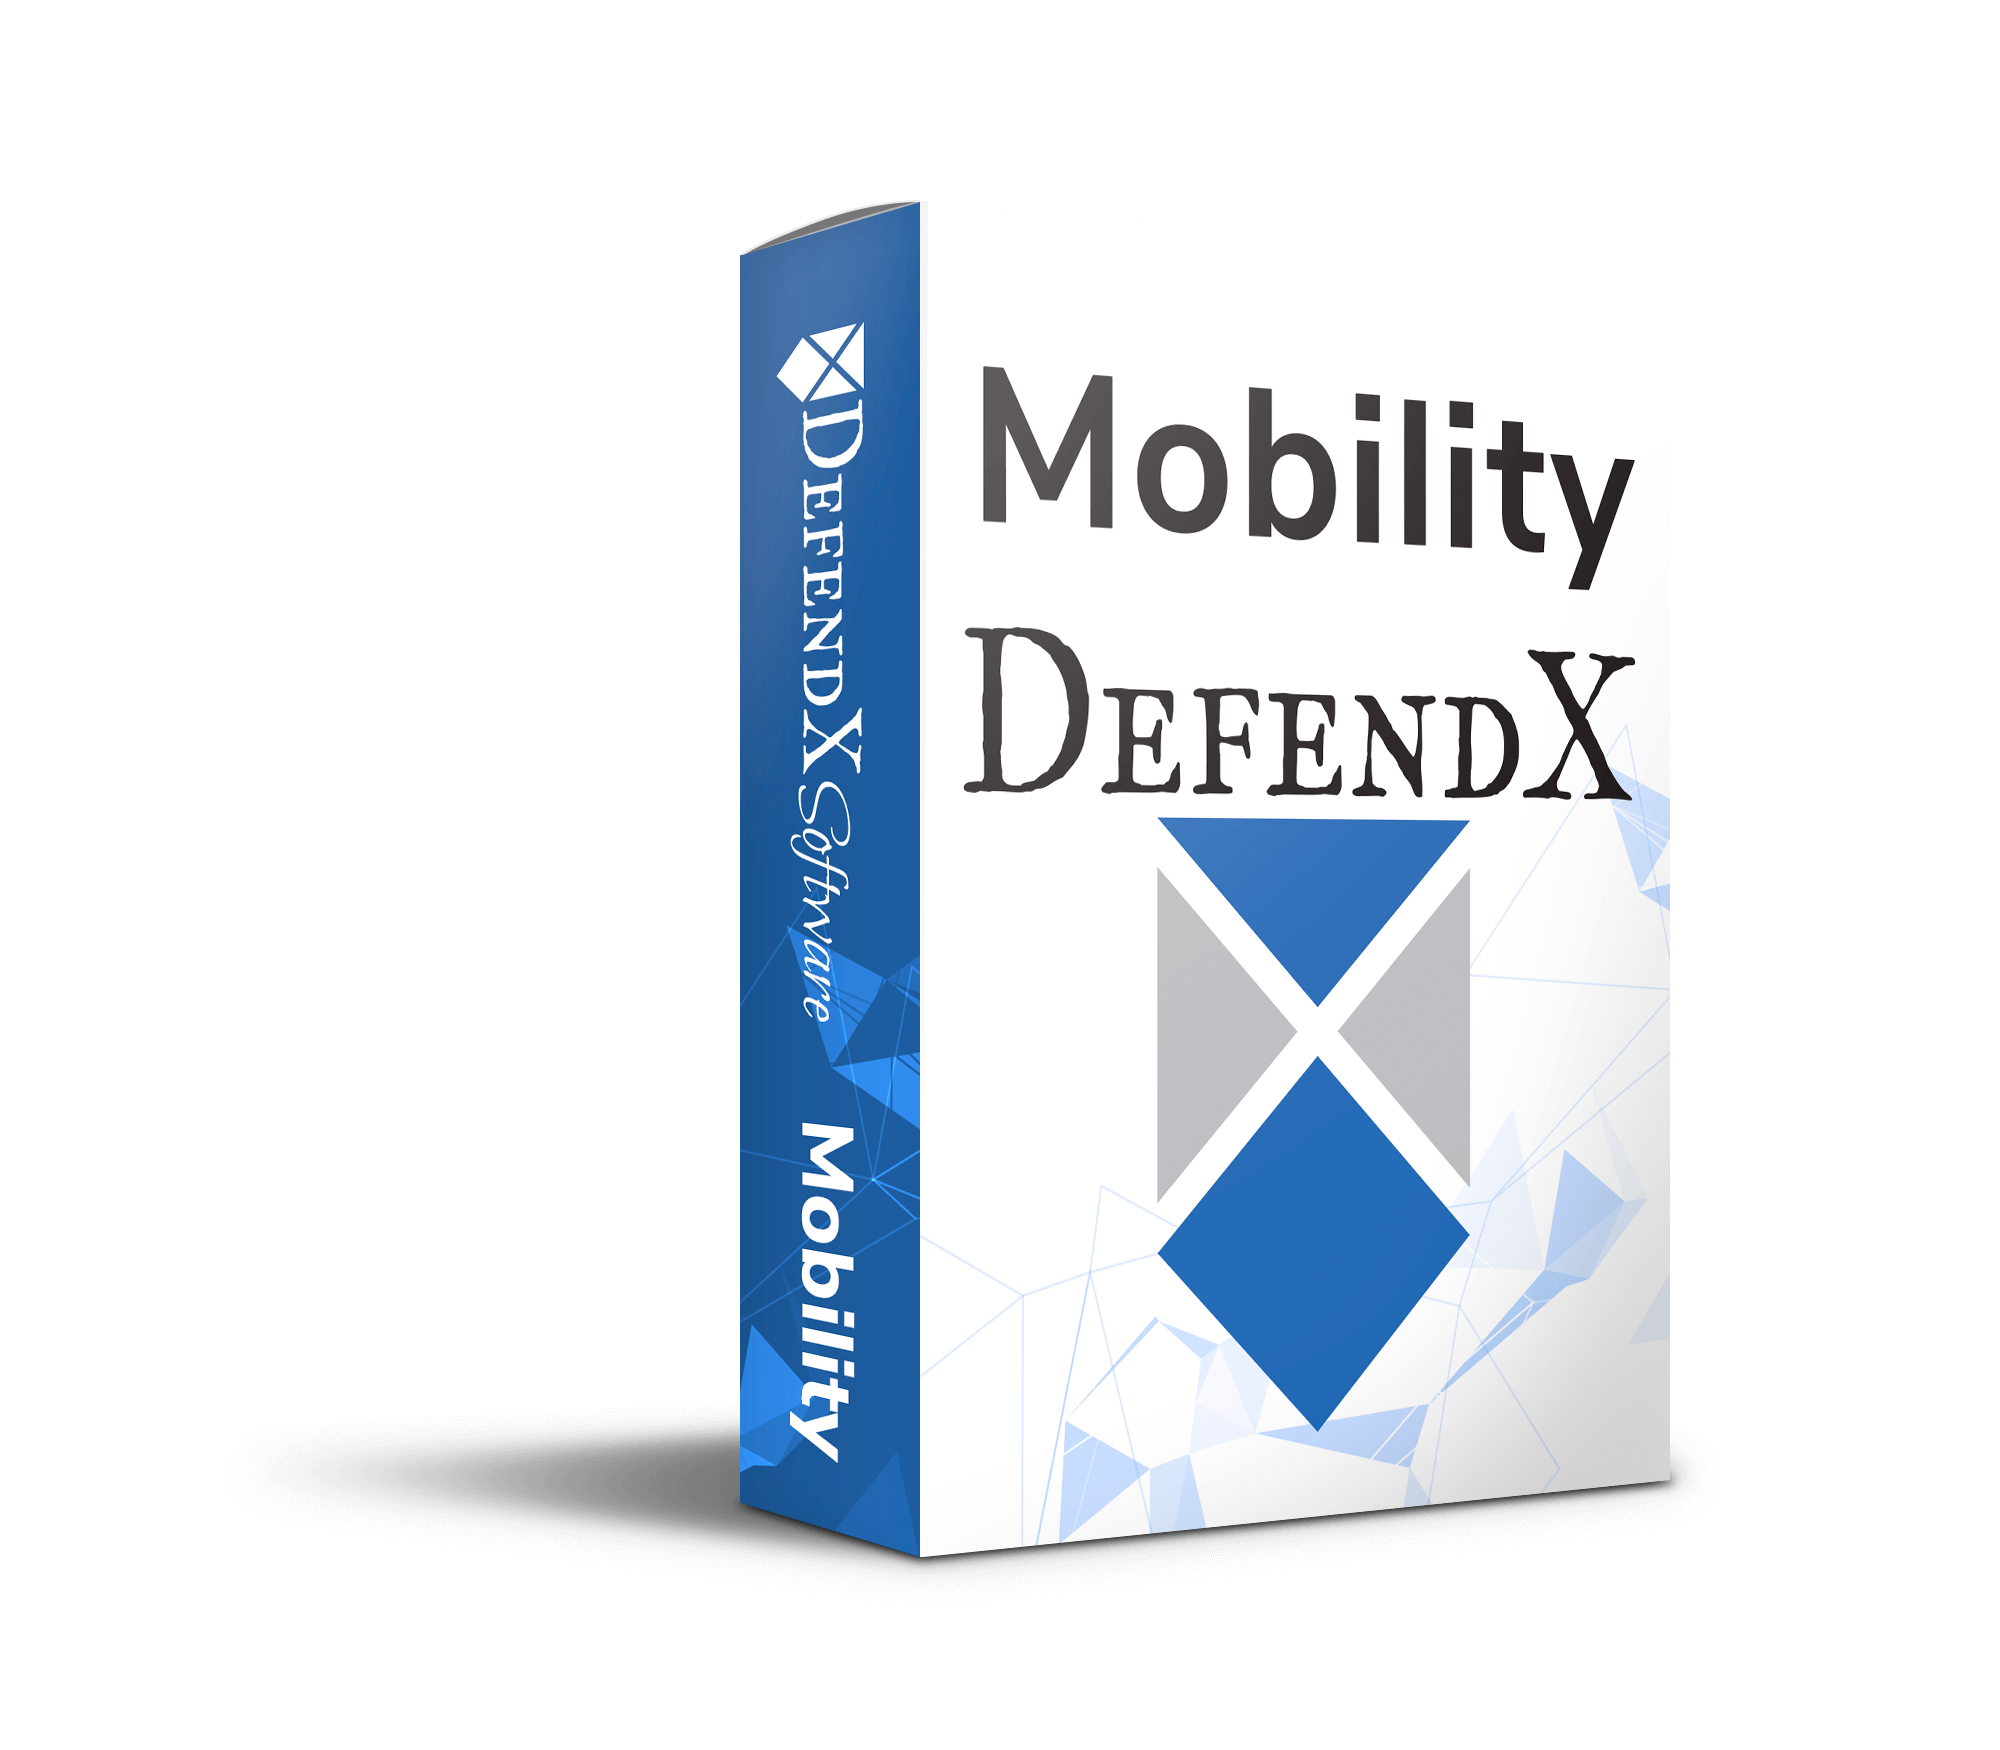 Mobility product box